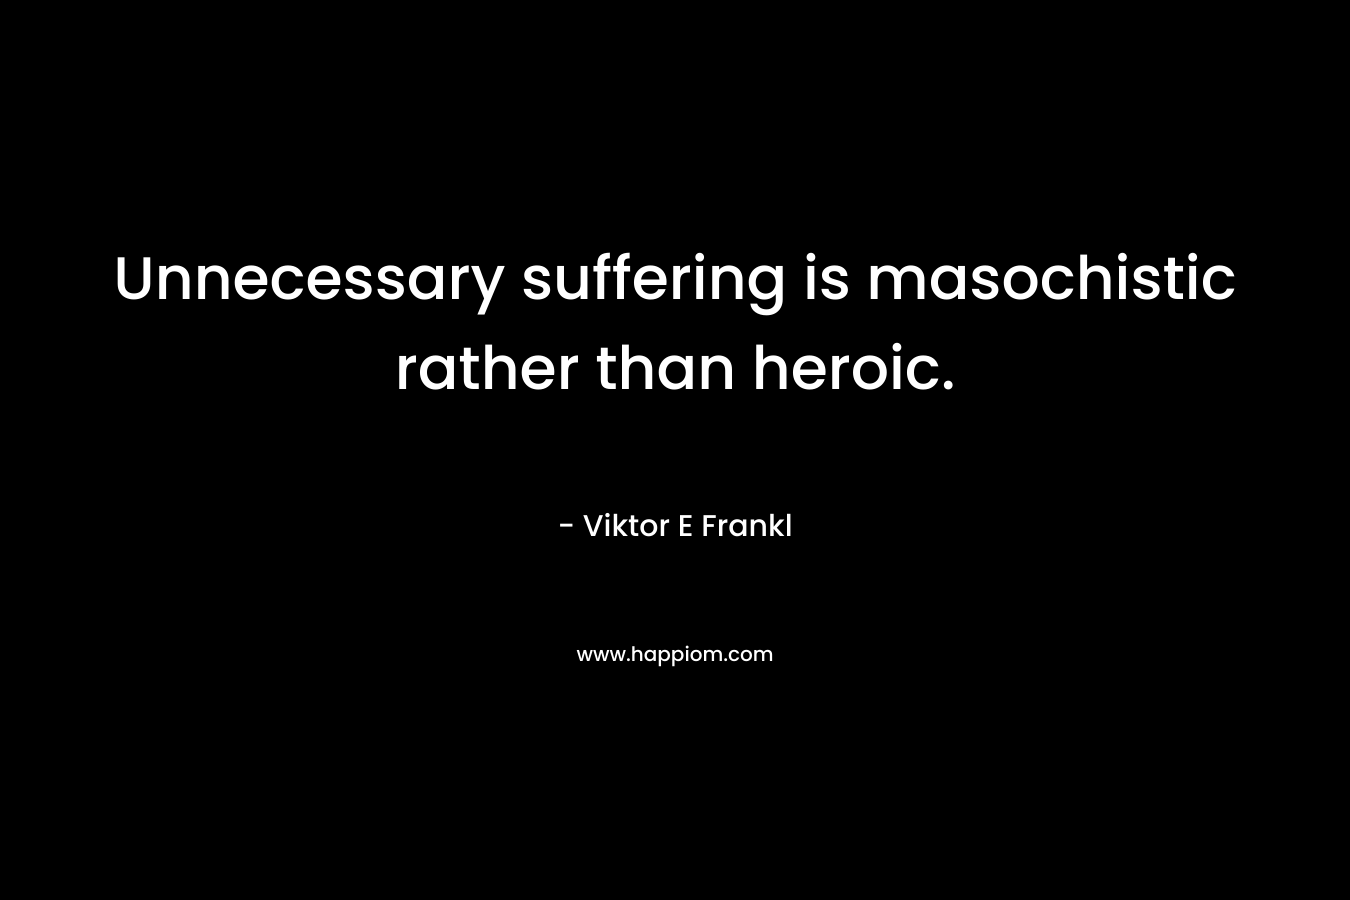 Unnecessary suffering is masochistic rather than heroic.